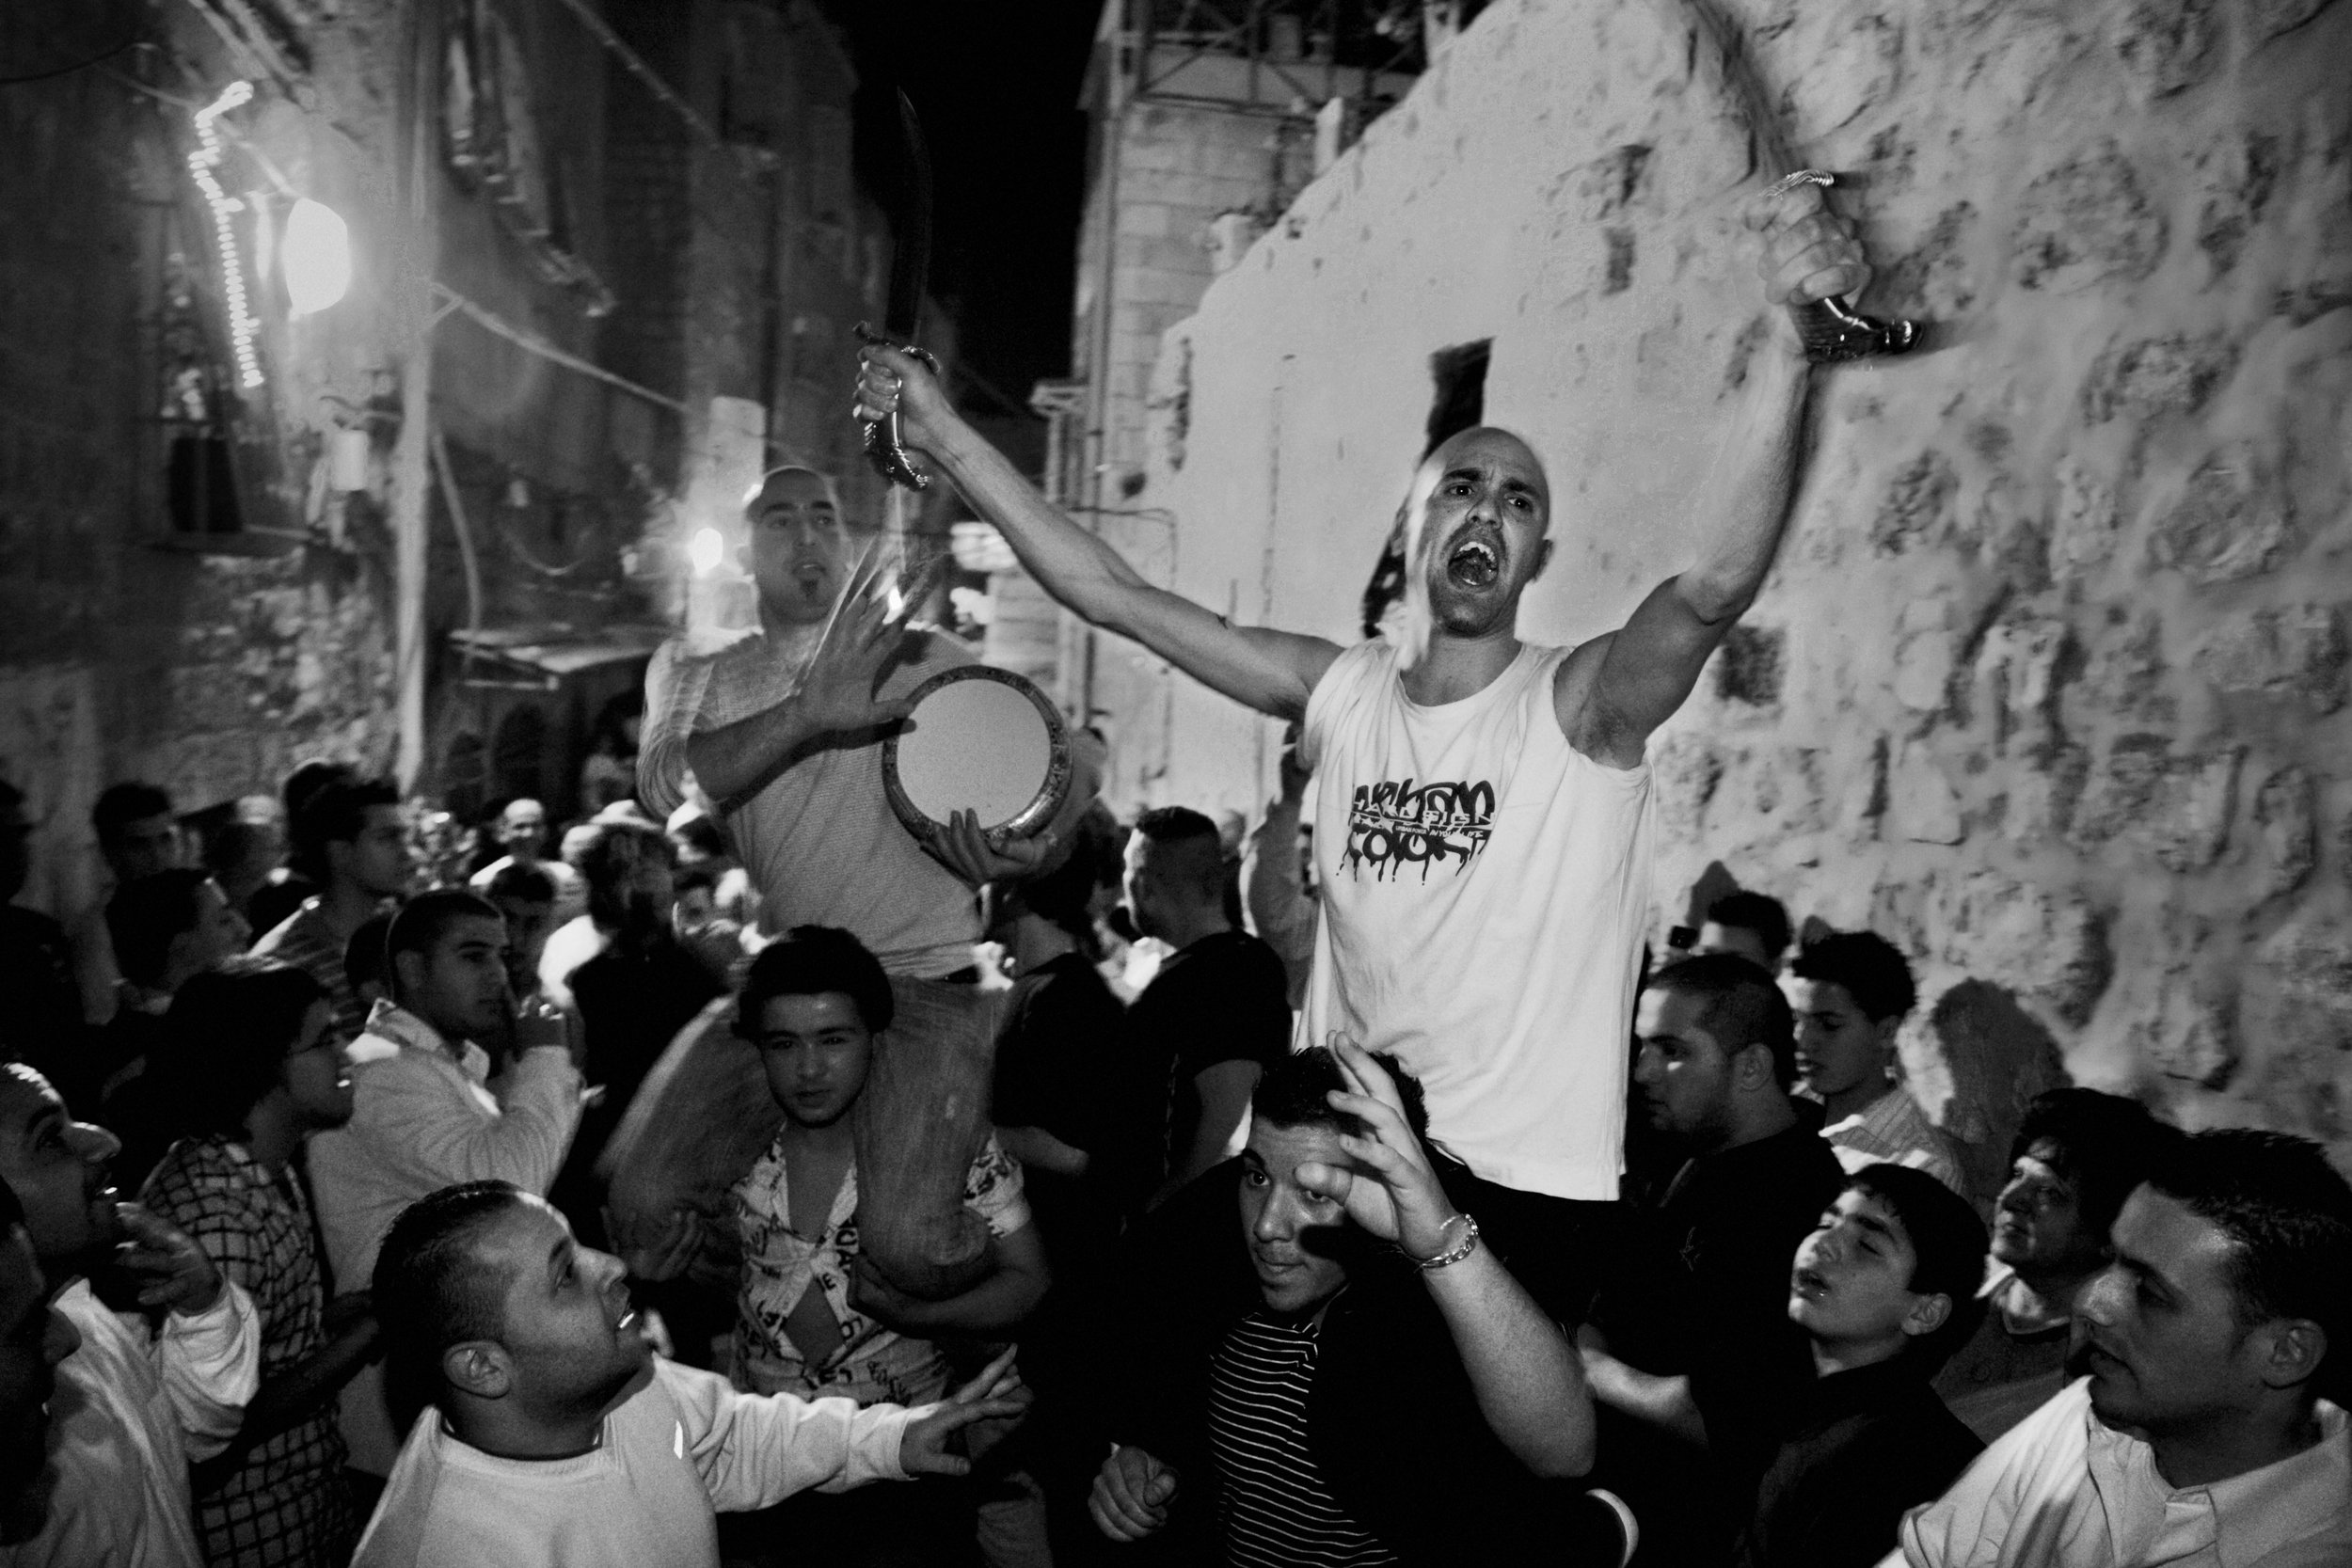  Palestinian Catholics celebrate their faith in the streets in the Old City of Jerusalem on March 22, 2008. The worshippers are celebrating Catholic Easter with a procession that is led by Arab Catholic Scouts. 